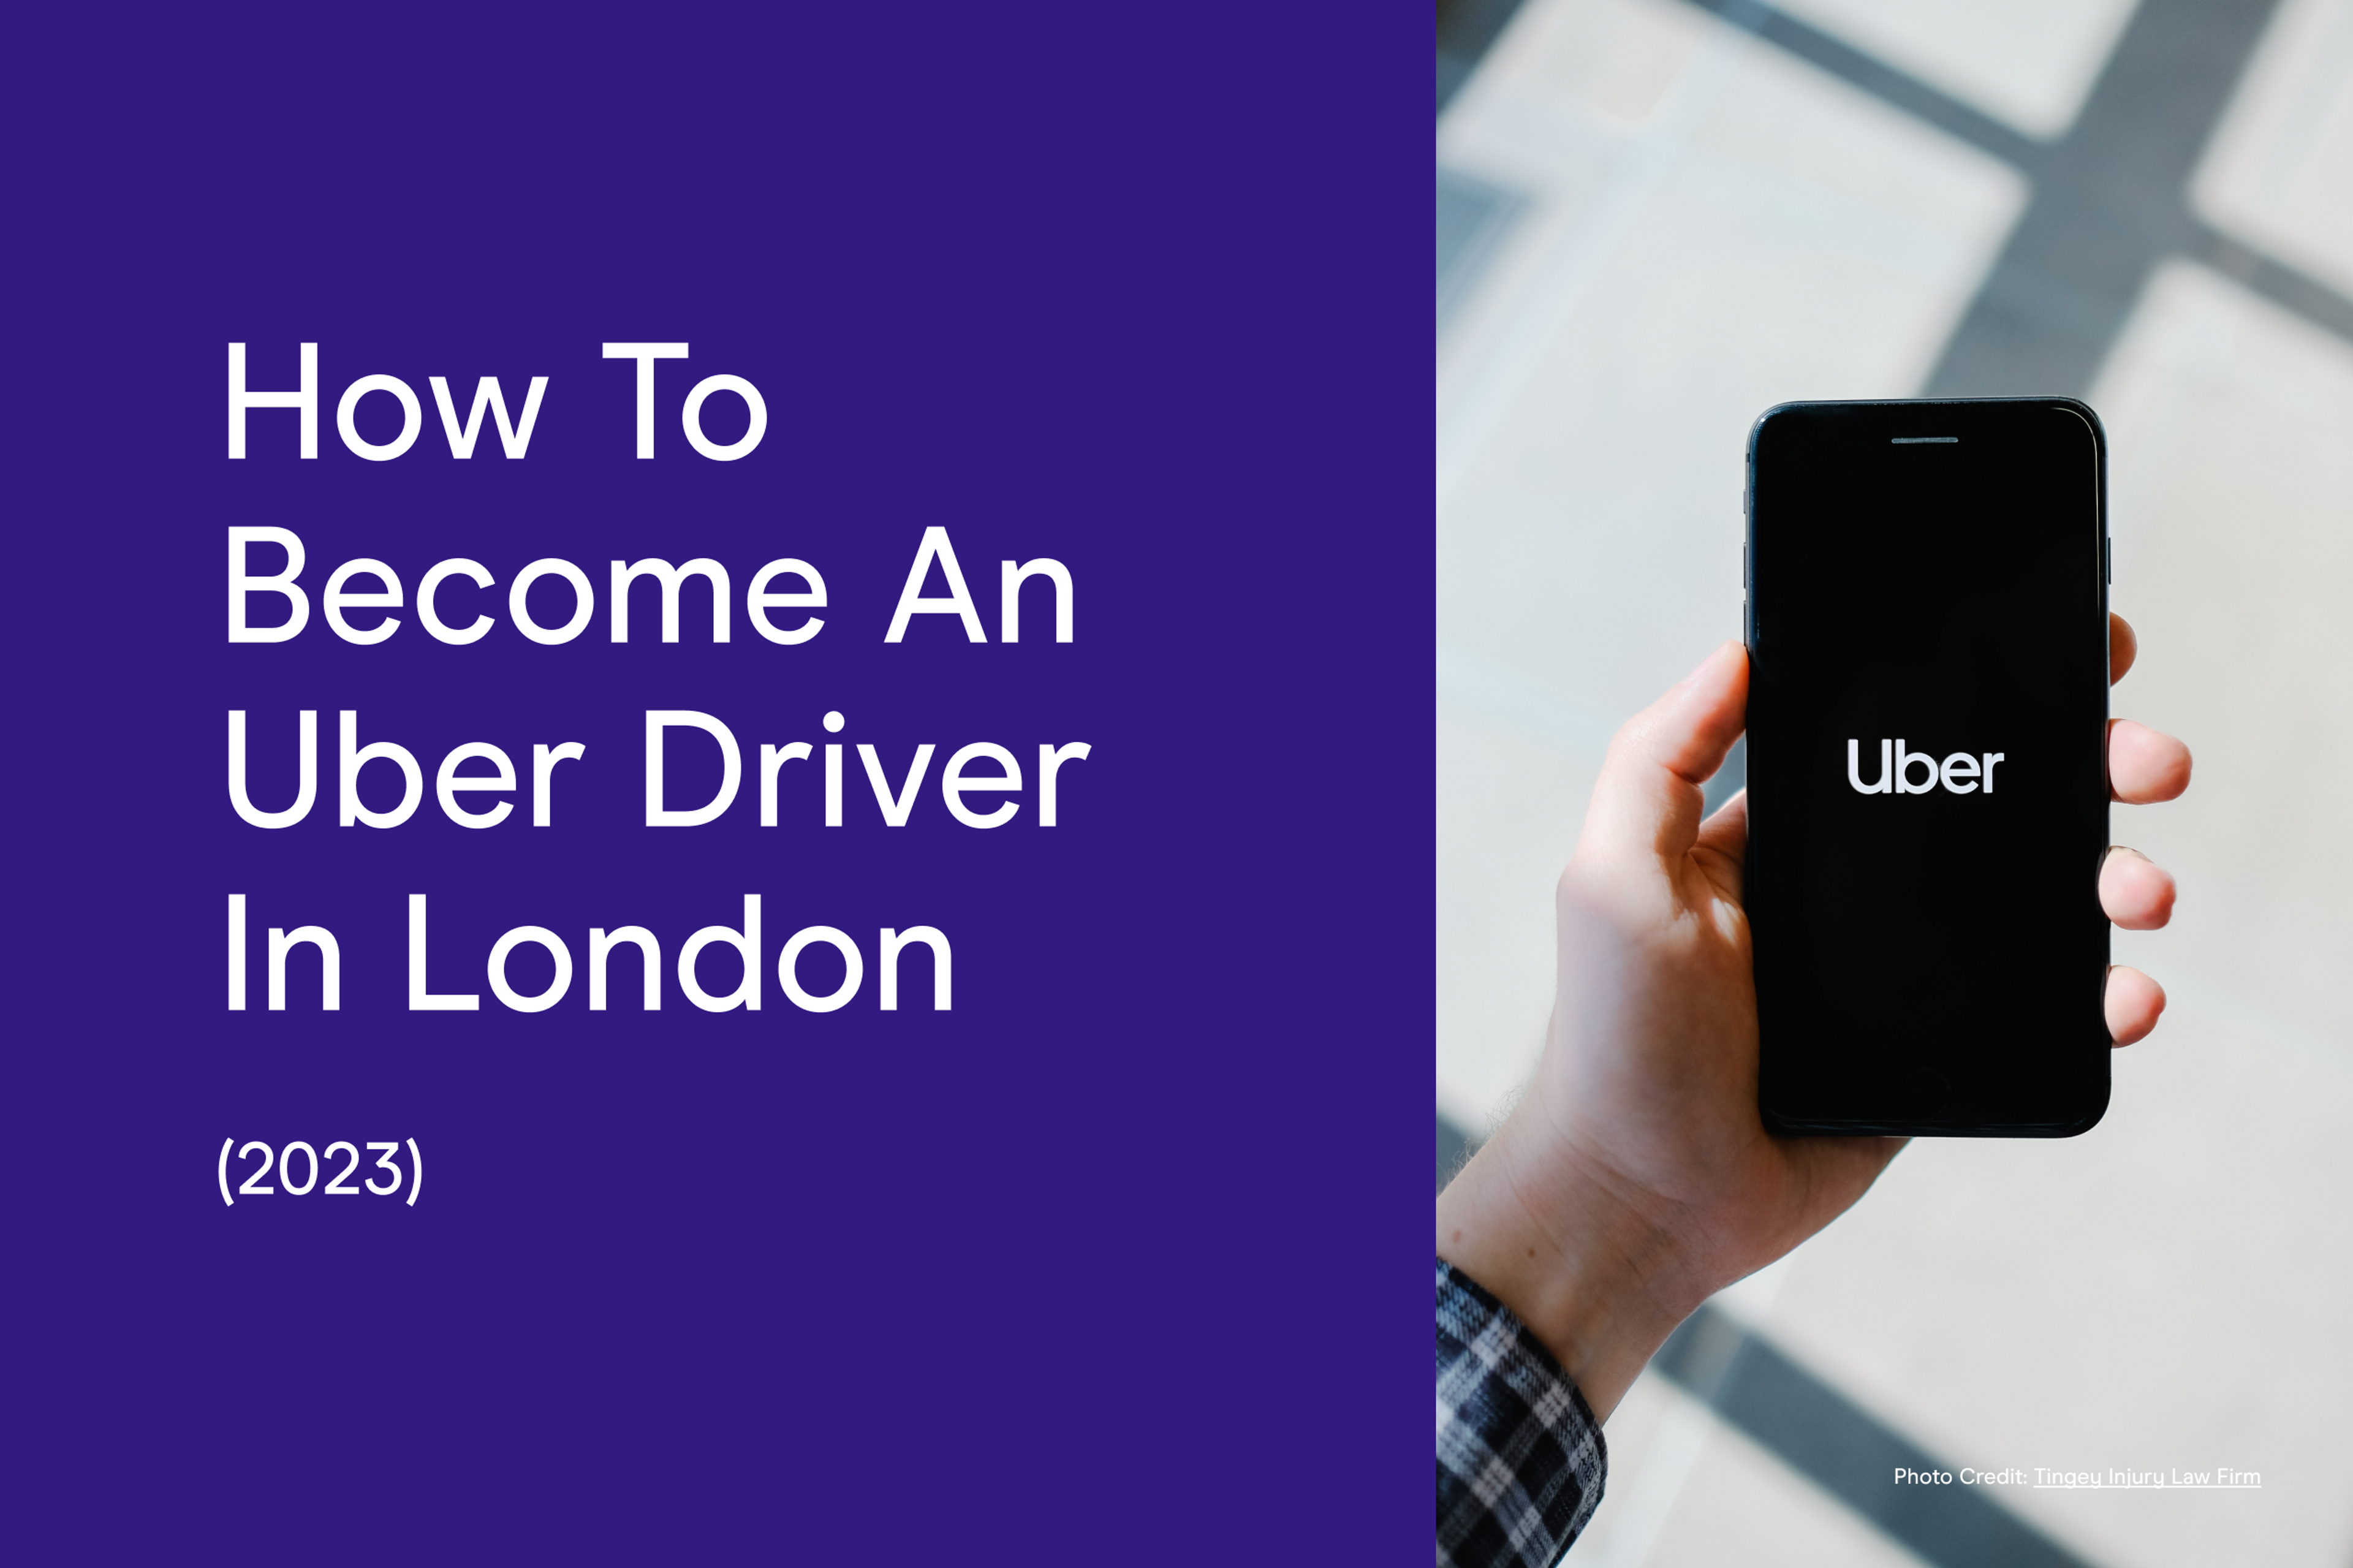 Becoming an Uber driver in London Blog Post